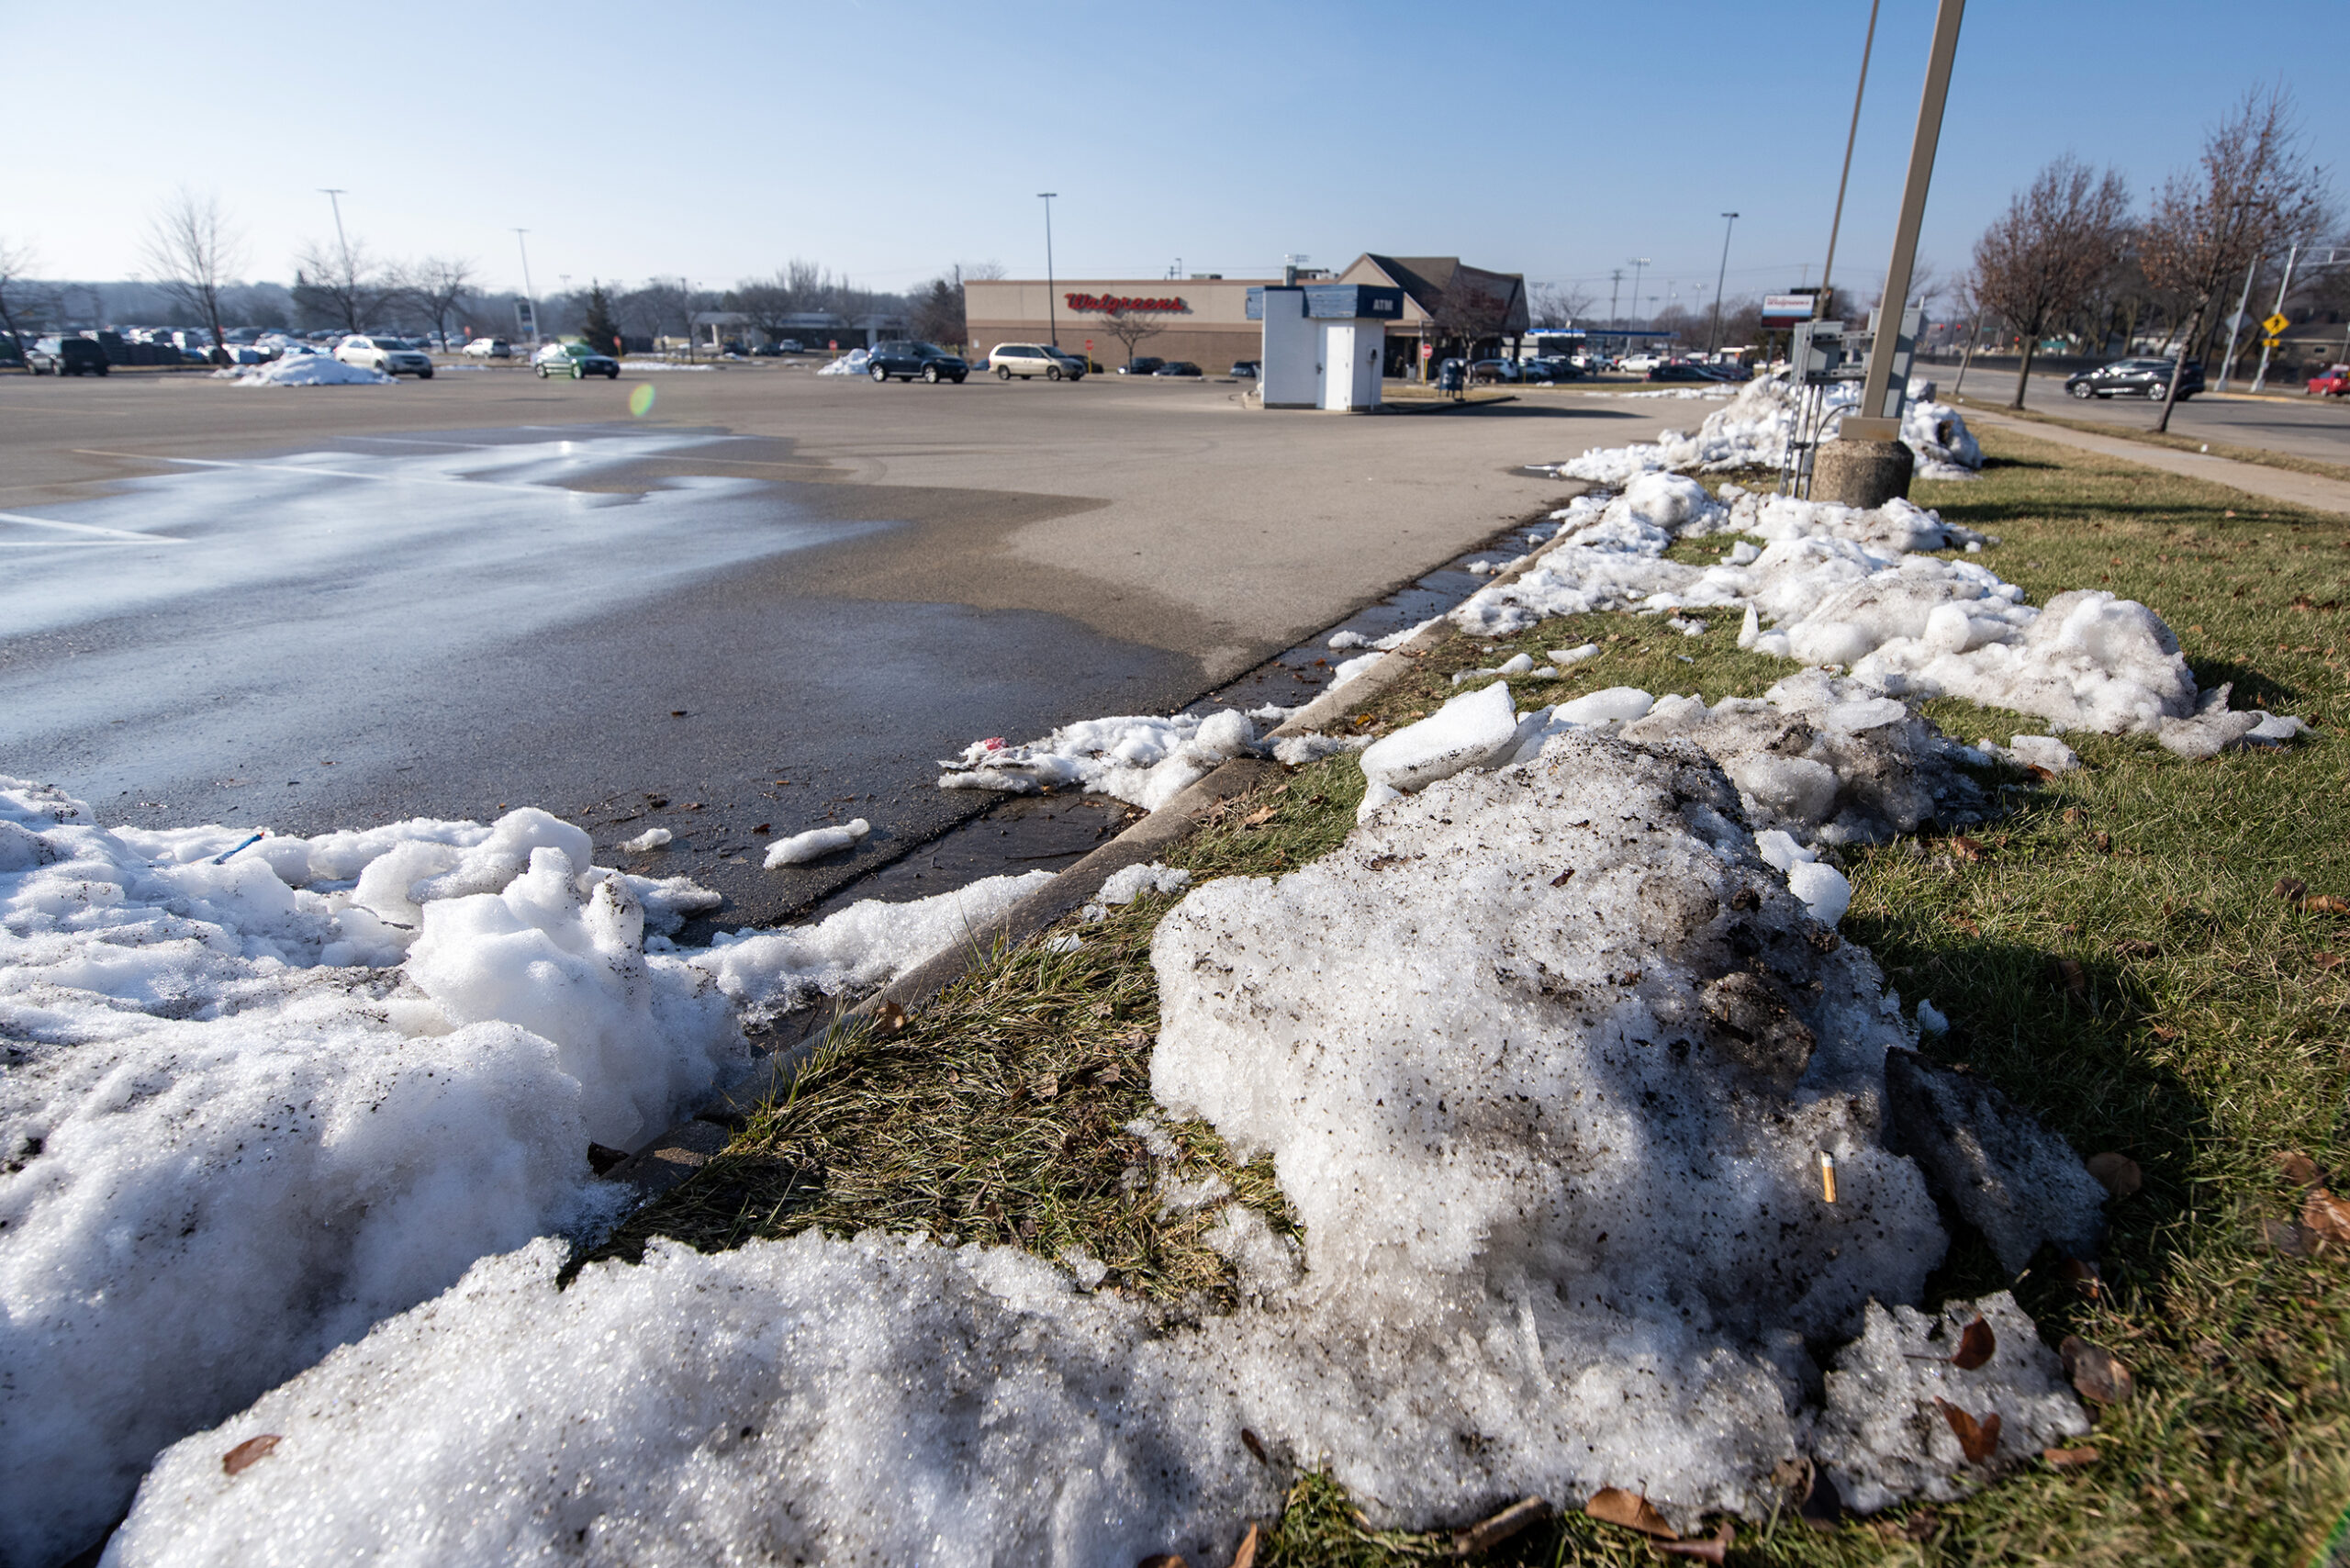 Low snowfall totals across southeast Wisconsin are impacting snow removal businesses, recreation